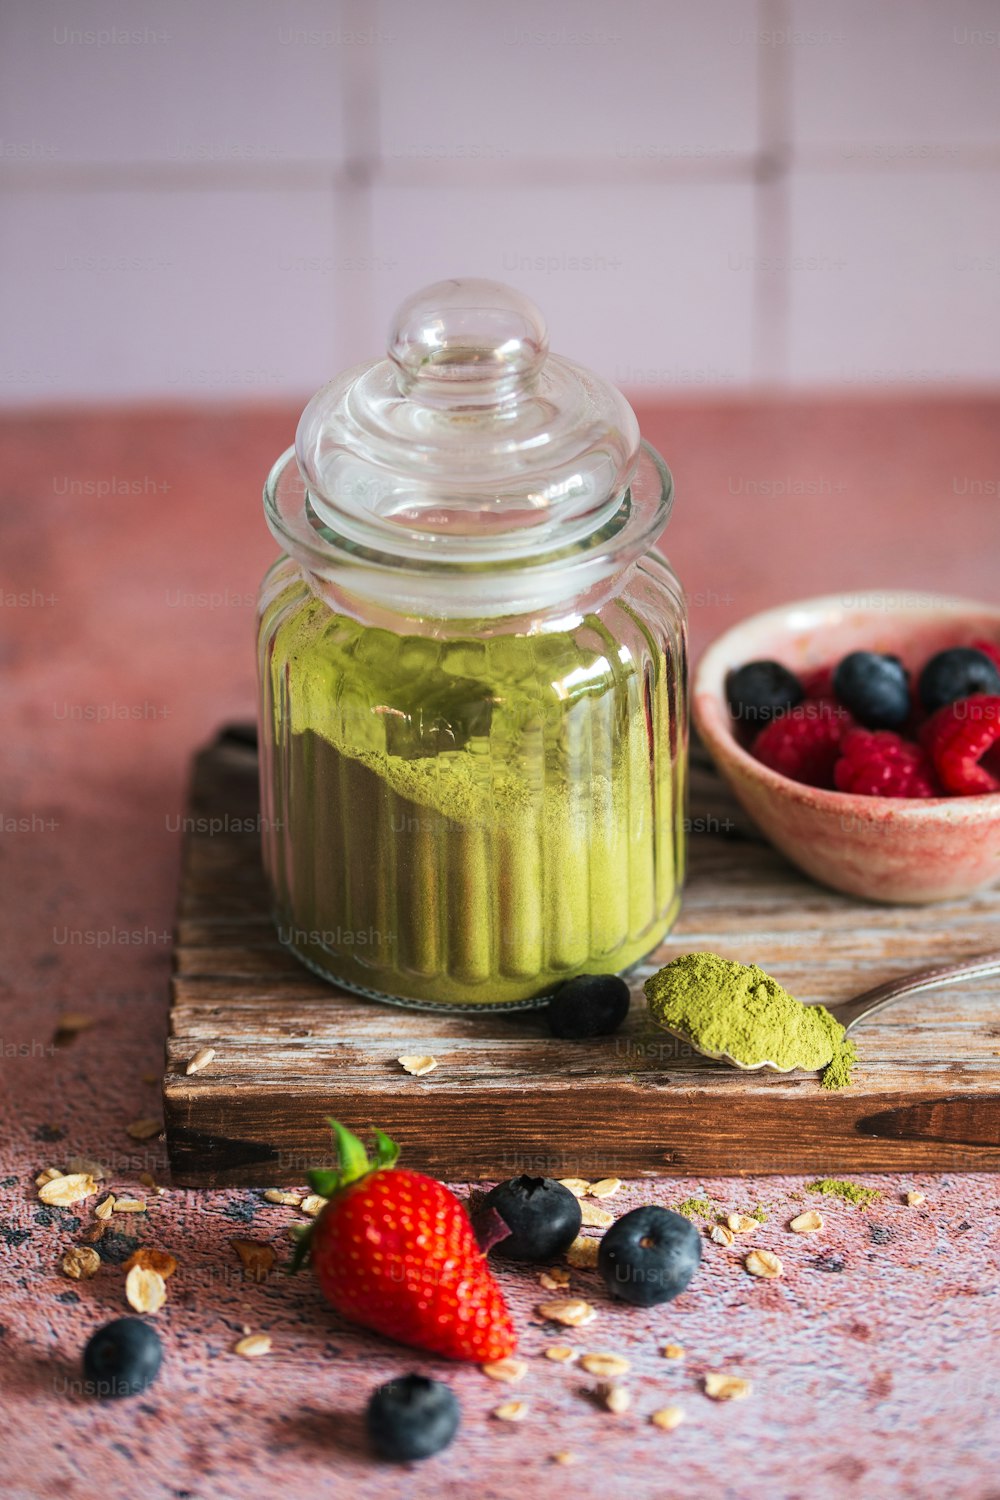 a glass jar filled with green liquid next to a bowl of berries